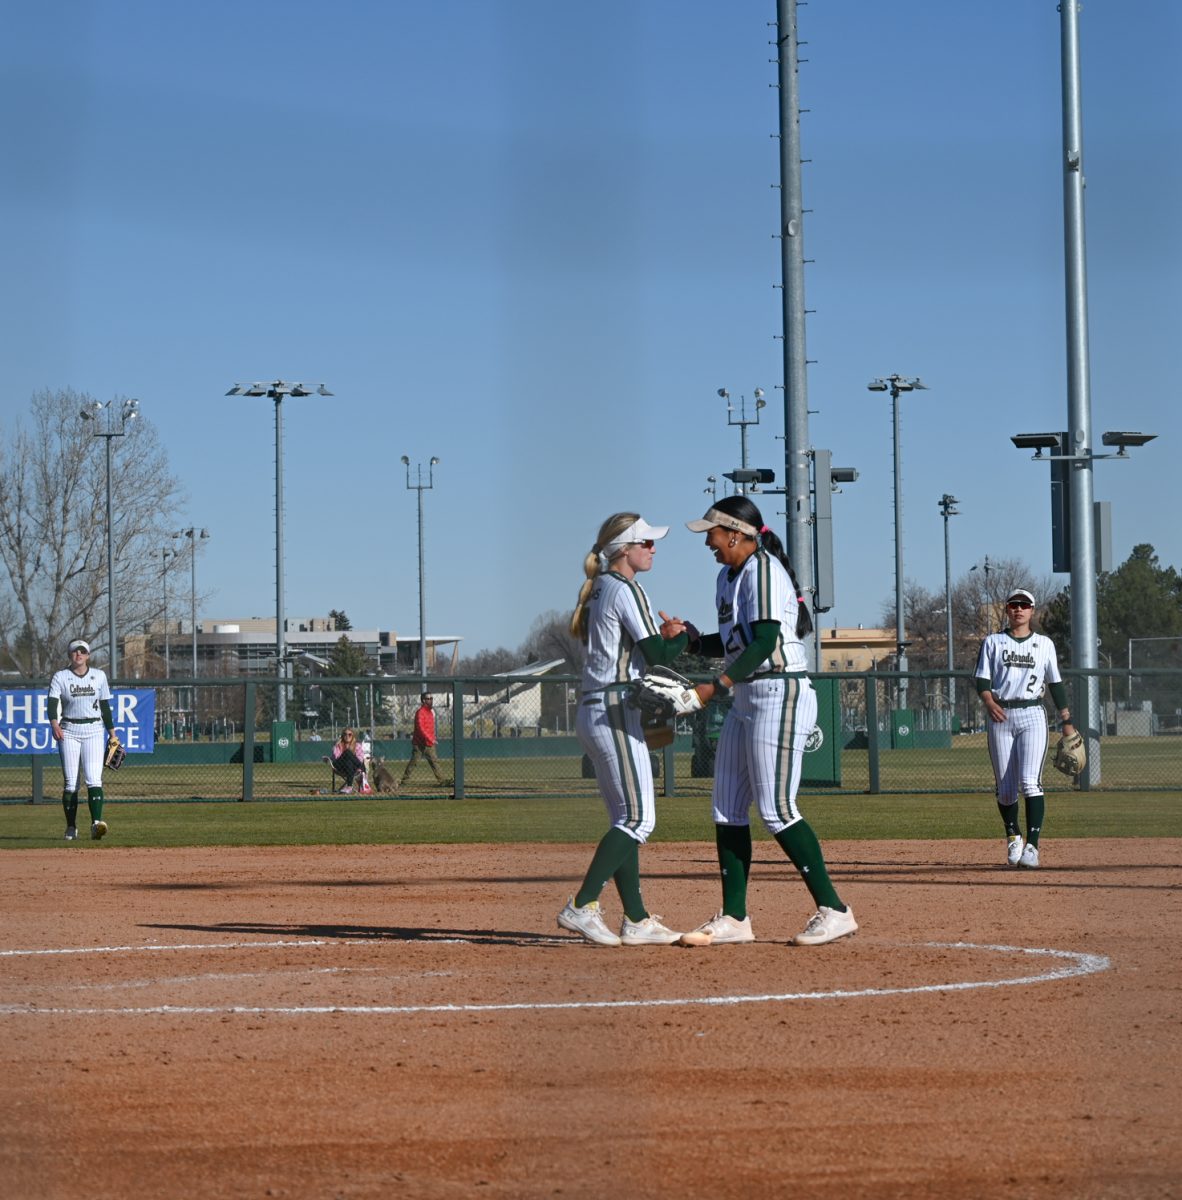 Two+CSU+players+give+each+other+a+handshake+after+a+well-made+play+during+the+CSU+vs.+University+of+Maine+softball+game+on+March+9.+%28CSU+won+6-2%29